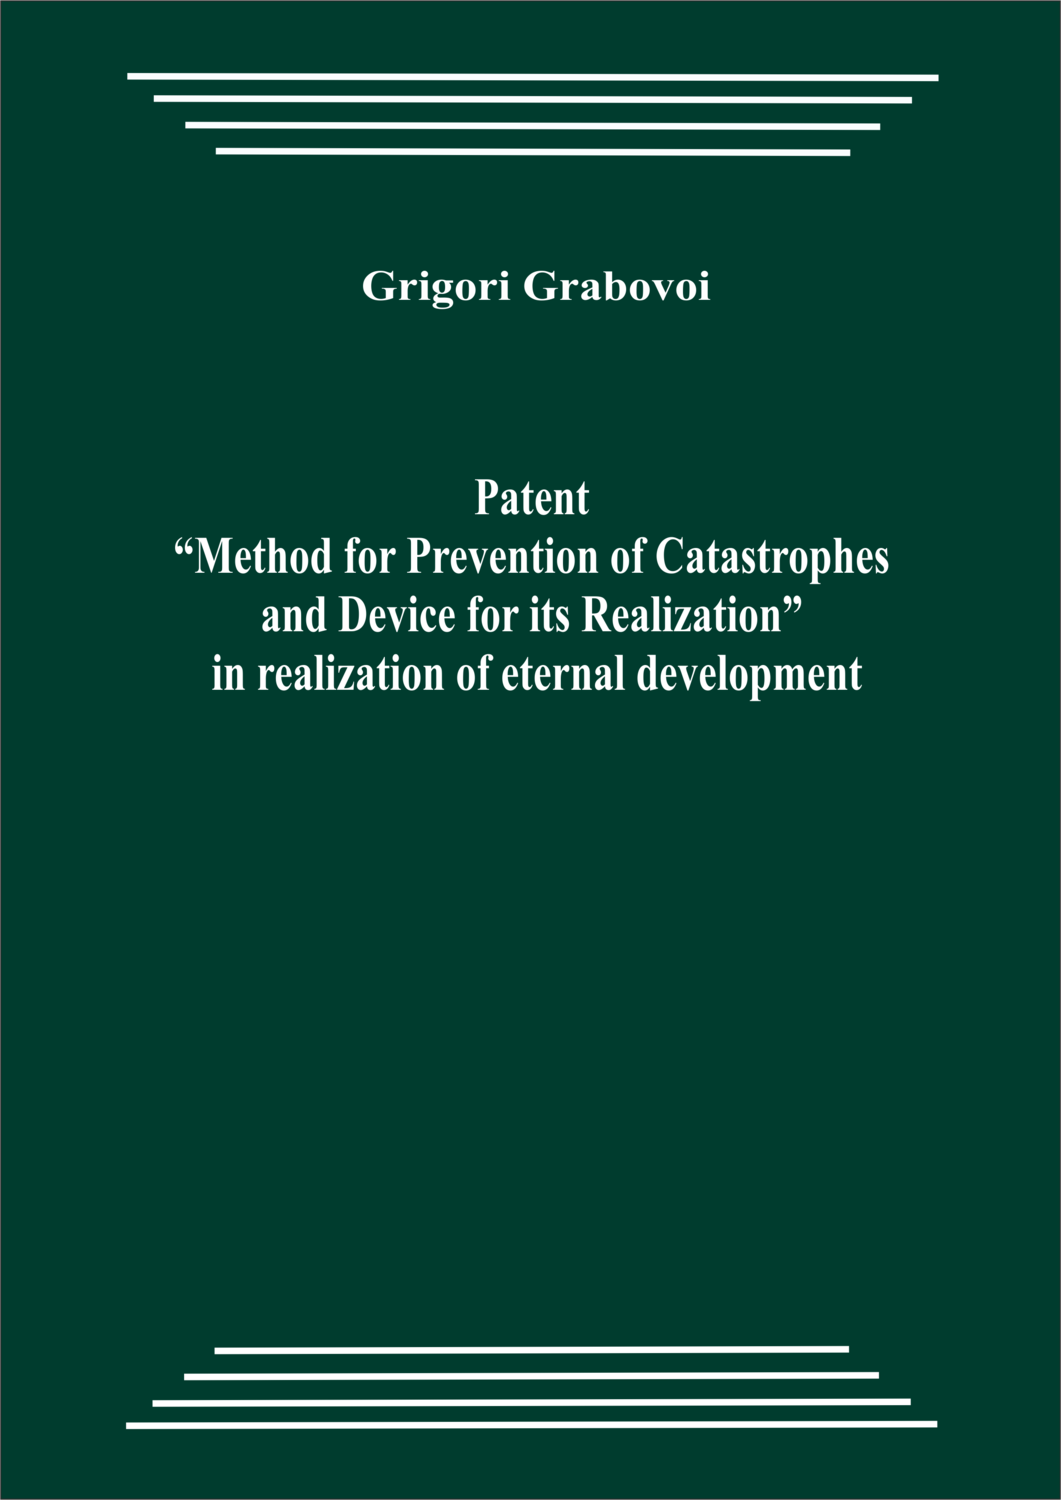 Patent “Method for Prevention of Catastrophes and Device for its Realization” in realization of eternal development